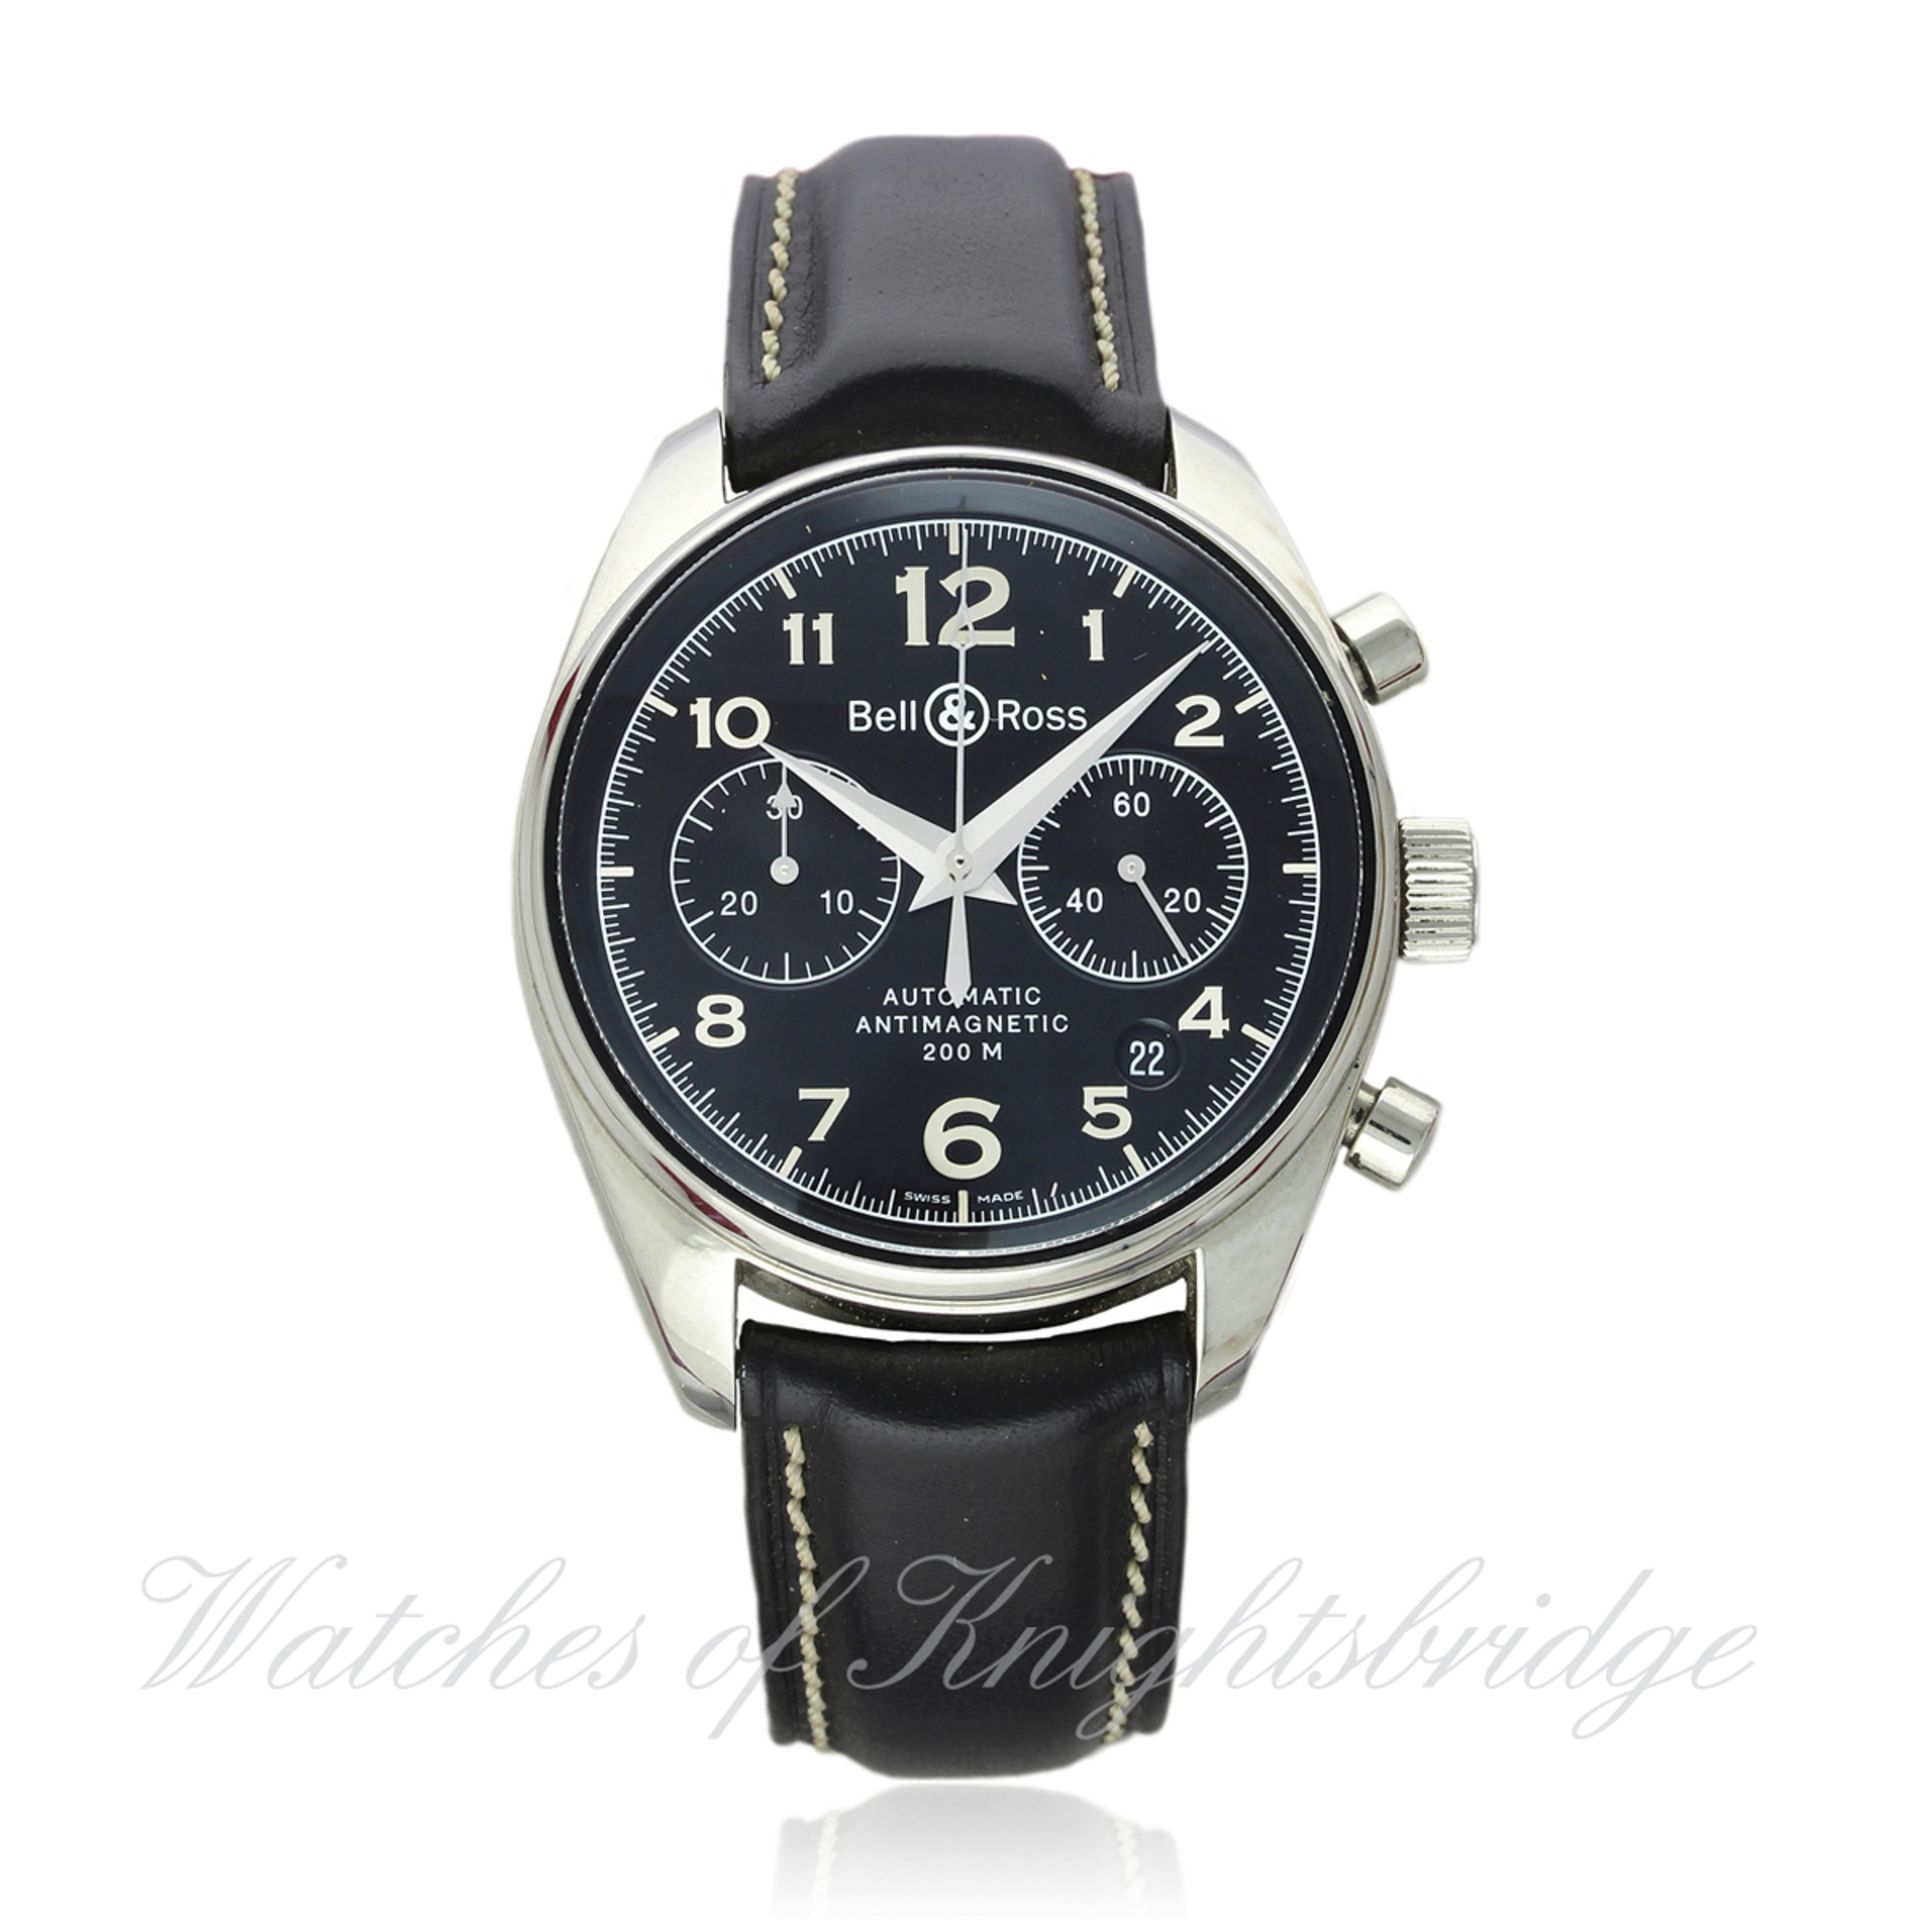 A GENTLEMAN`S STAINLESS STEEL BELL & ROSS VINTAGE 126 AUTOMATIC CHRONOGRAPH WRIST WATCH DATED